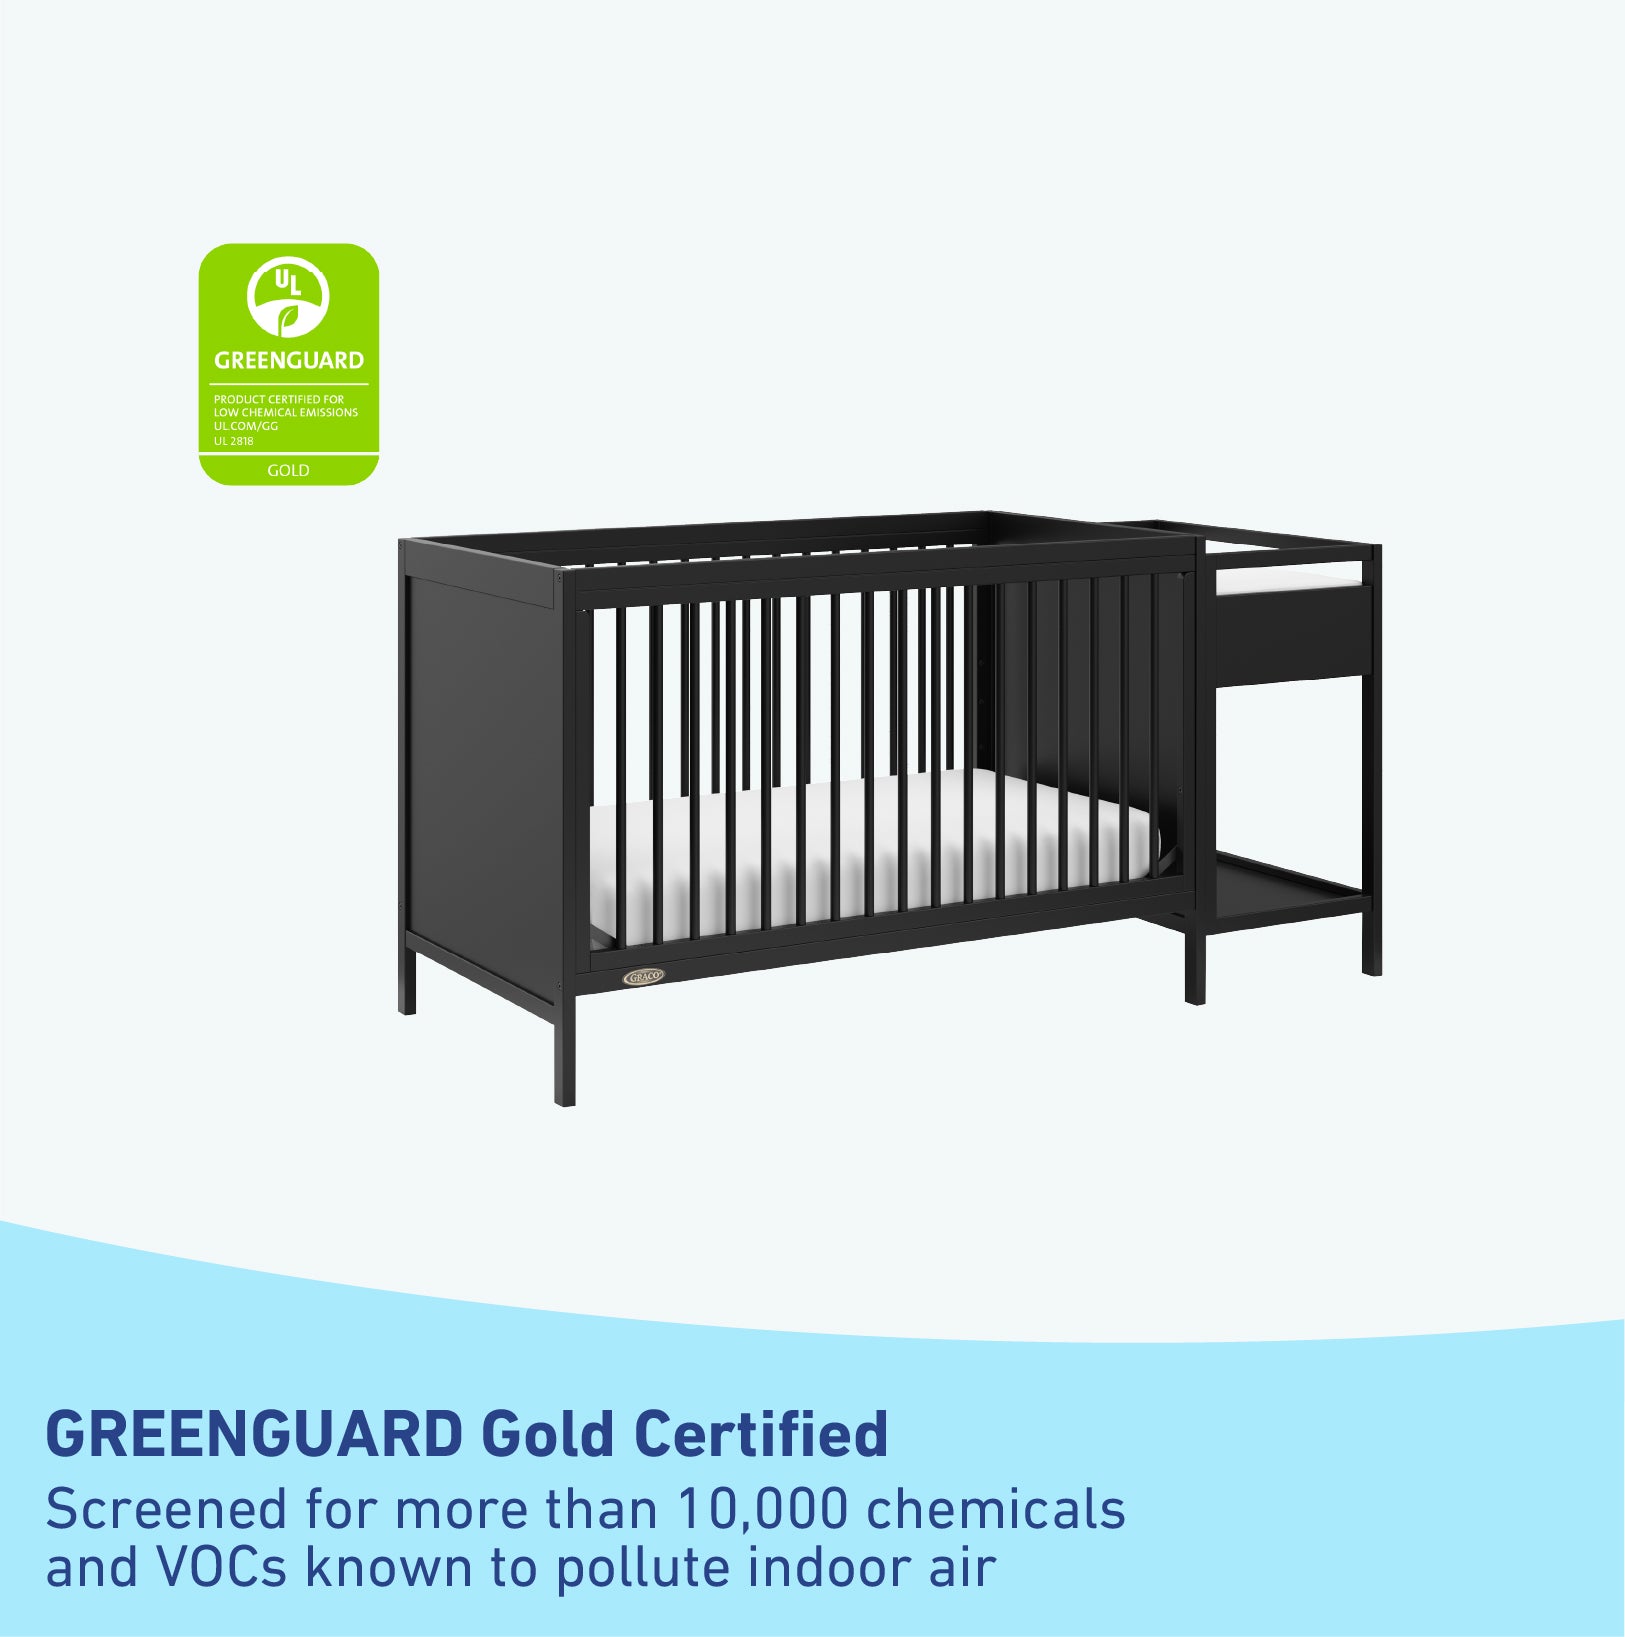 GREENGUARD Gold Certified black crib and changer